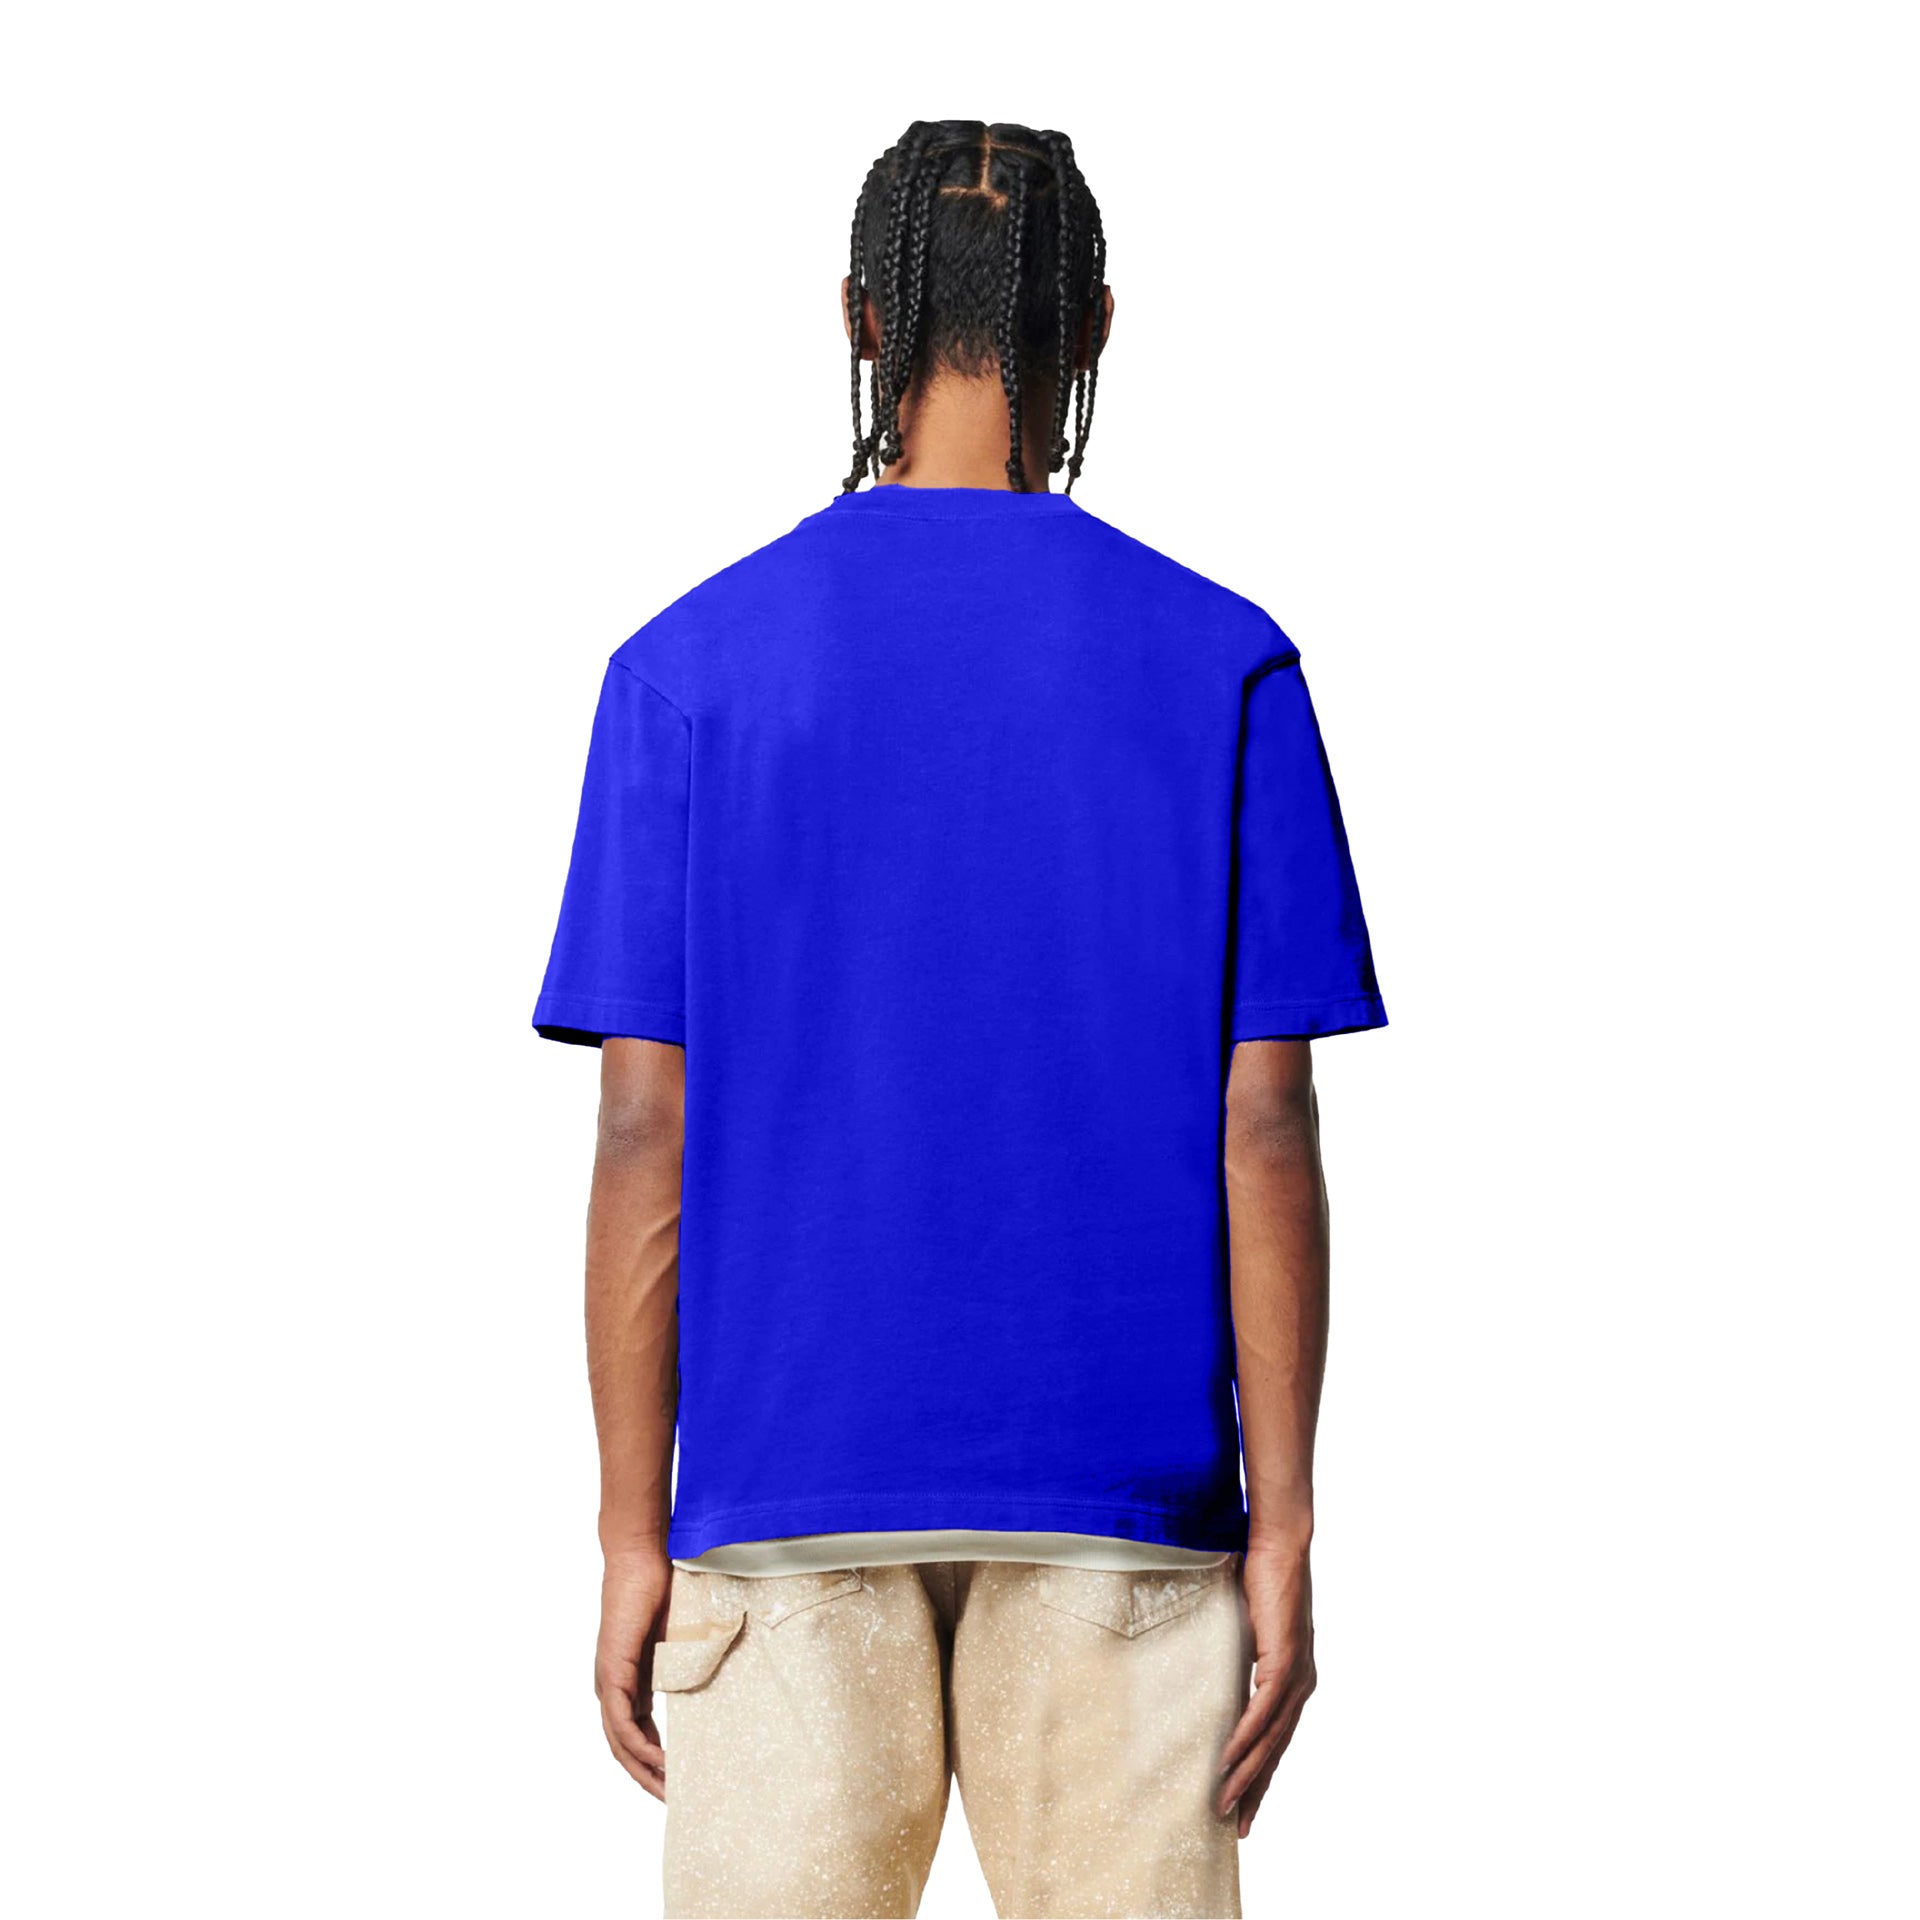 Blue T-shirt From I'm West